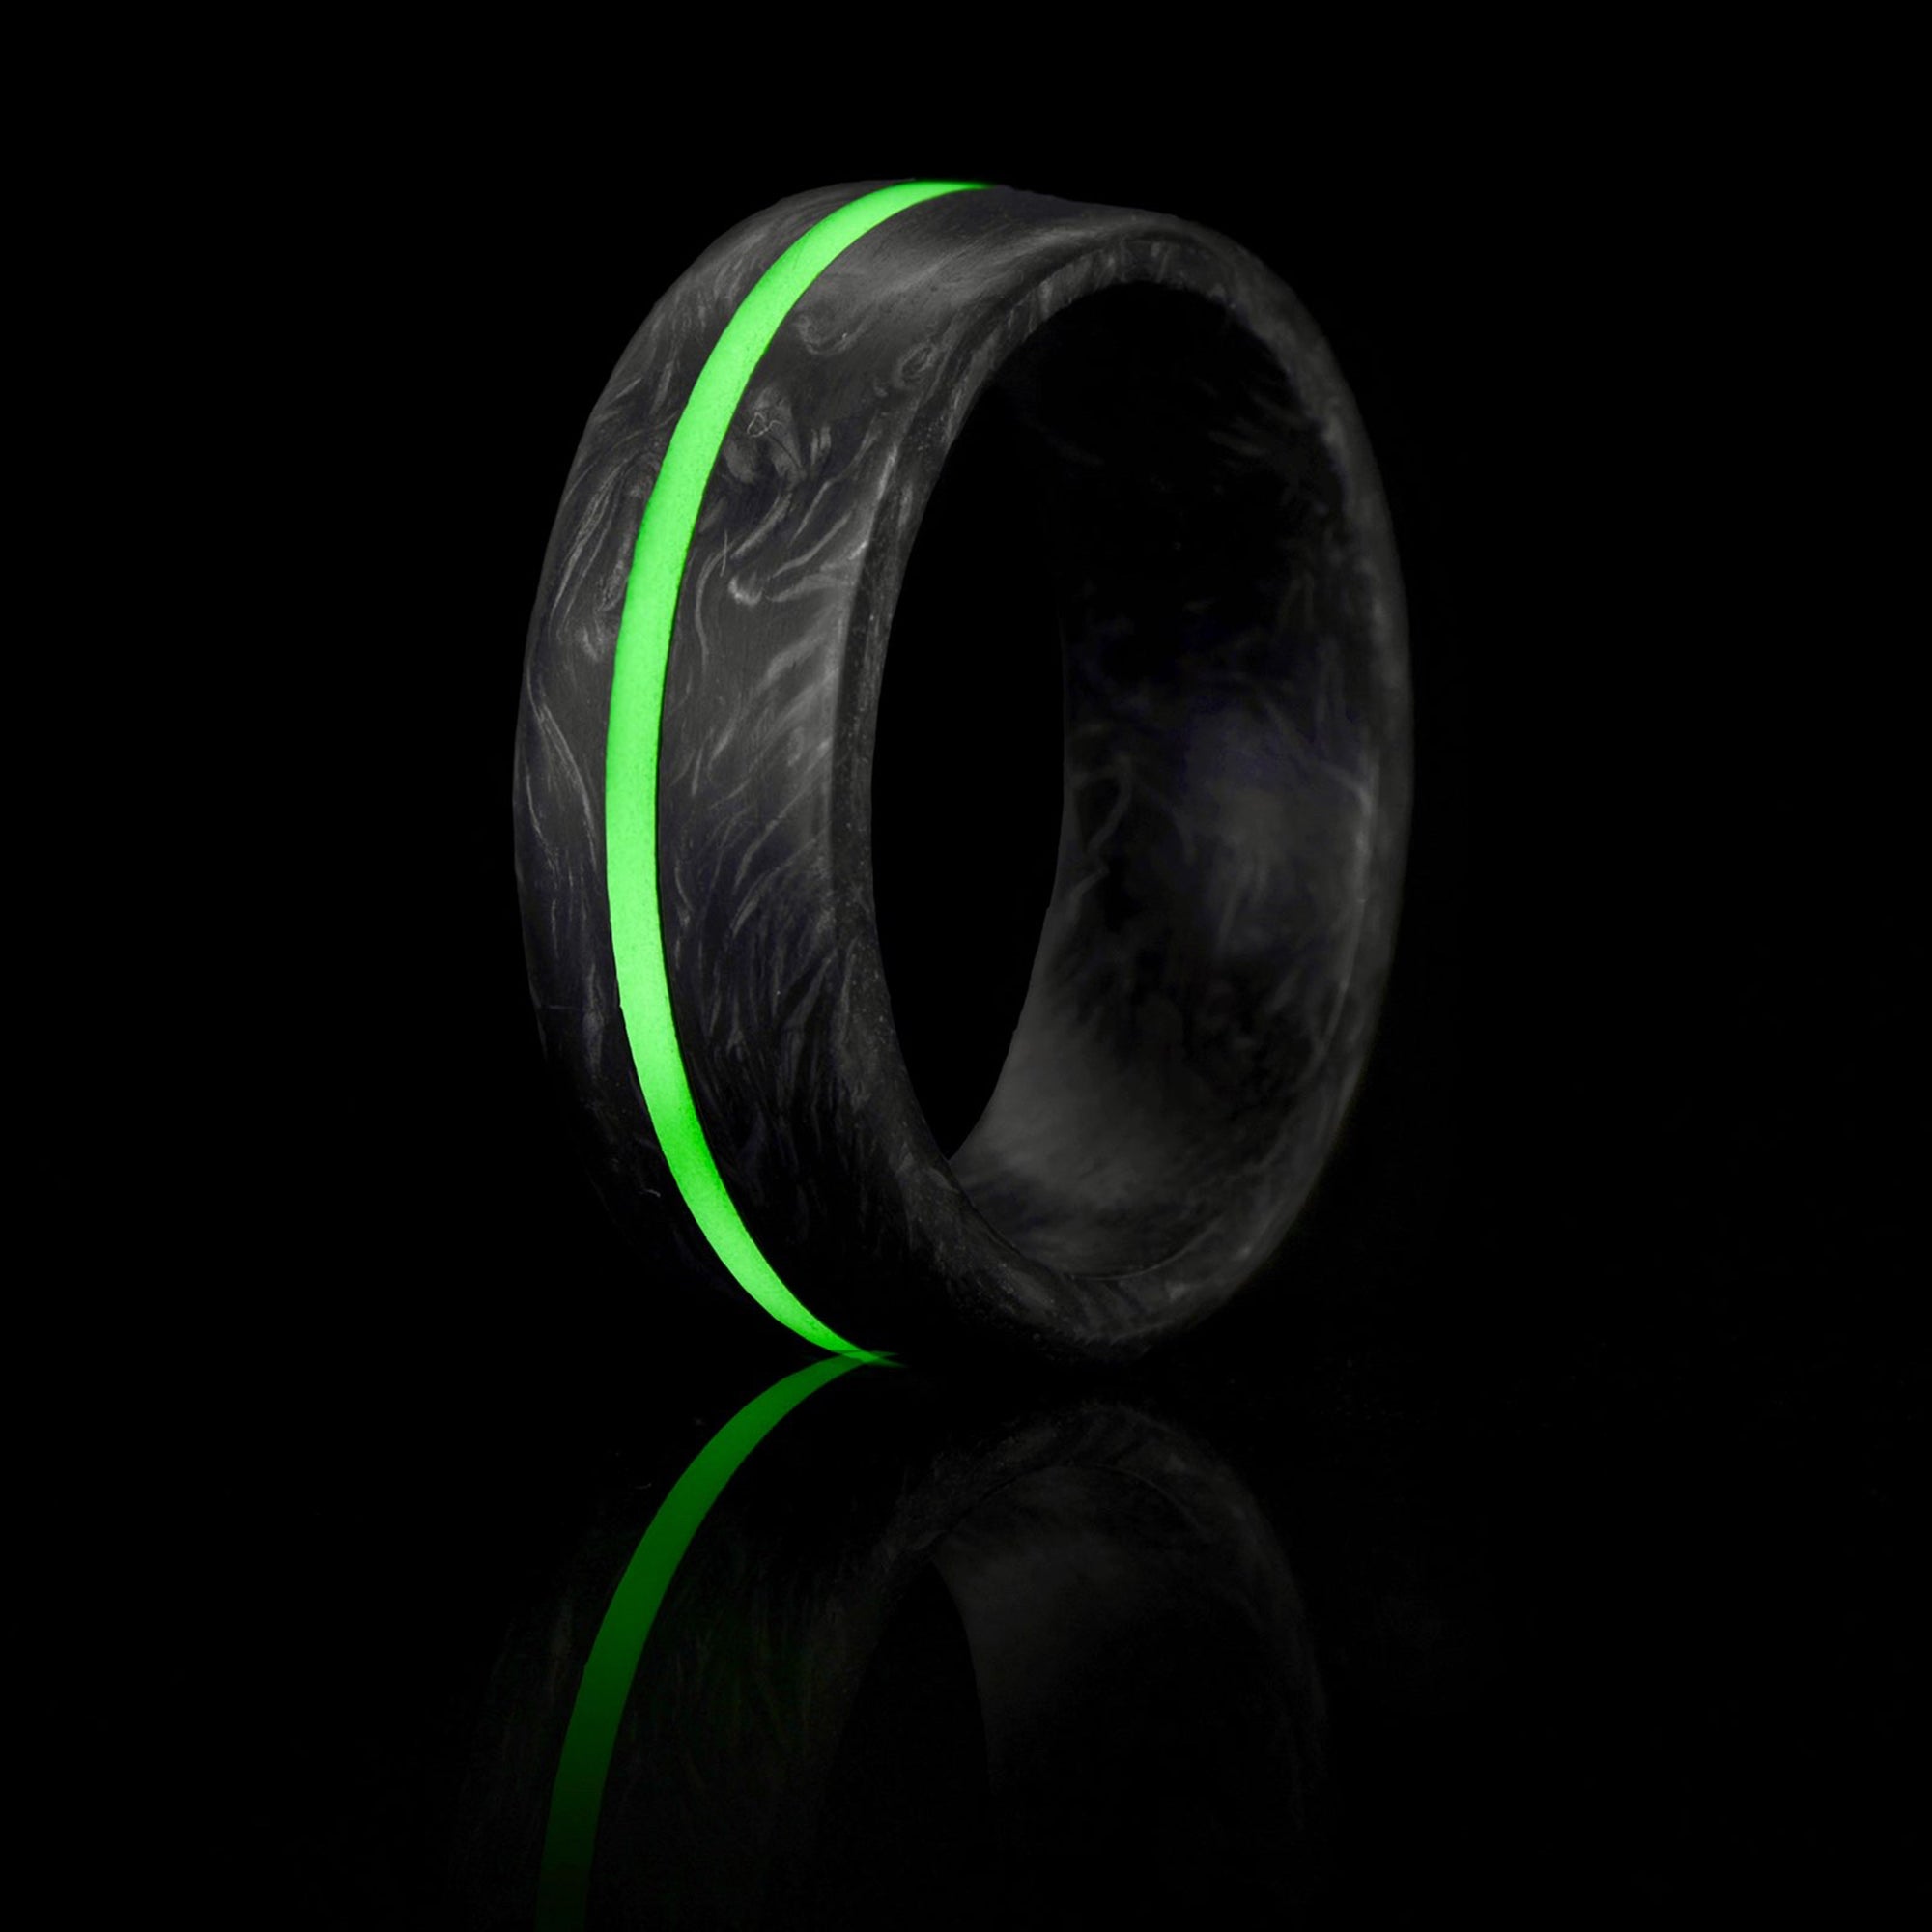 Carbon Fiber Ring with center inlayed green glow stripe.